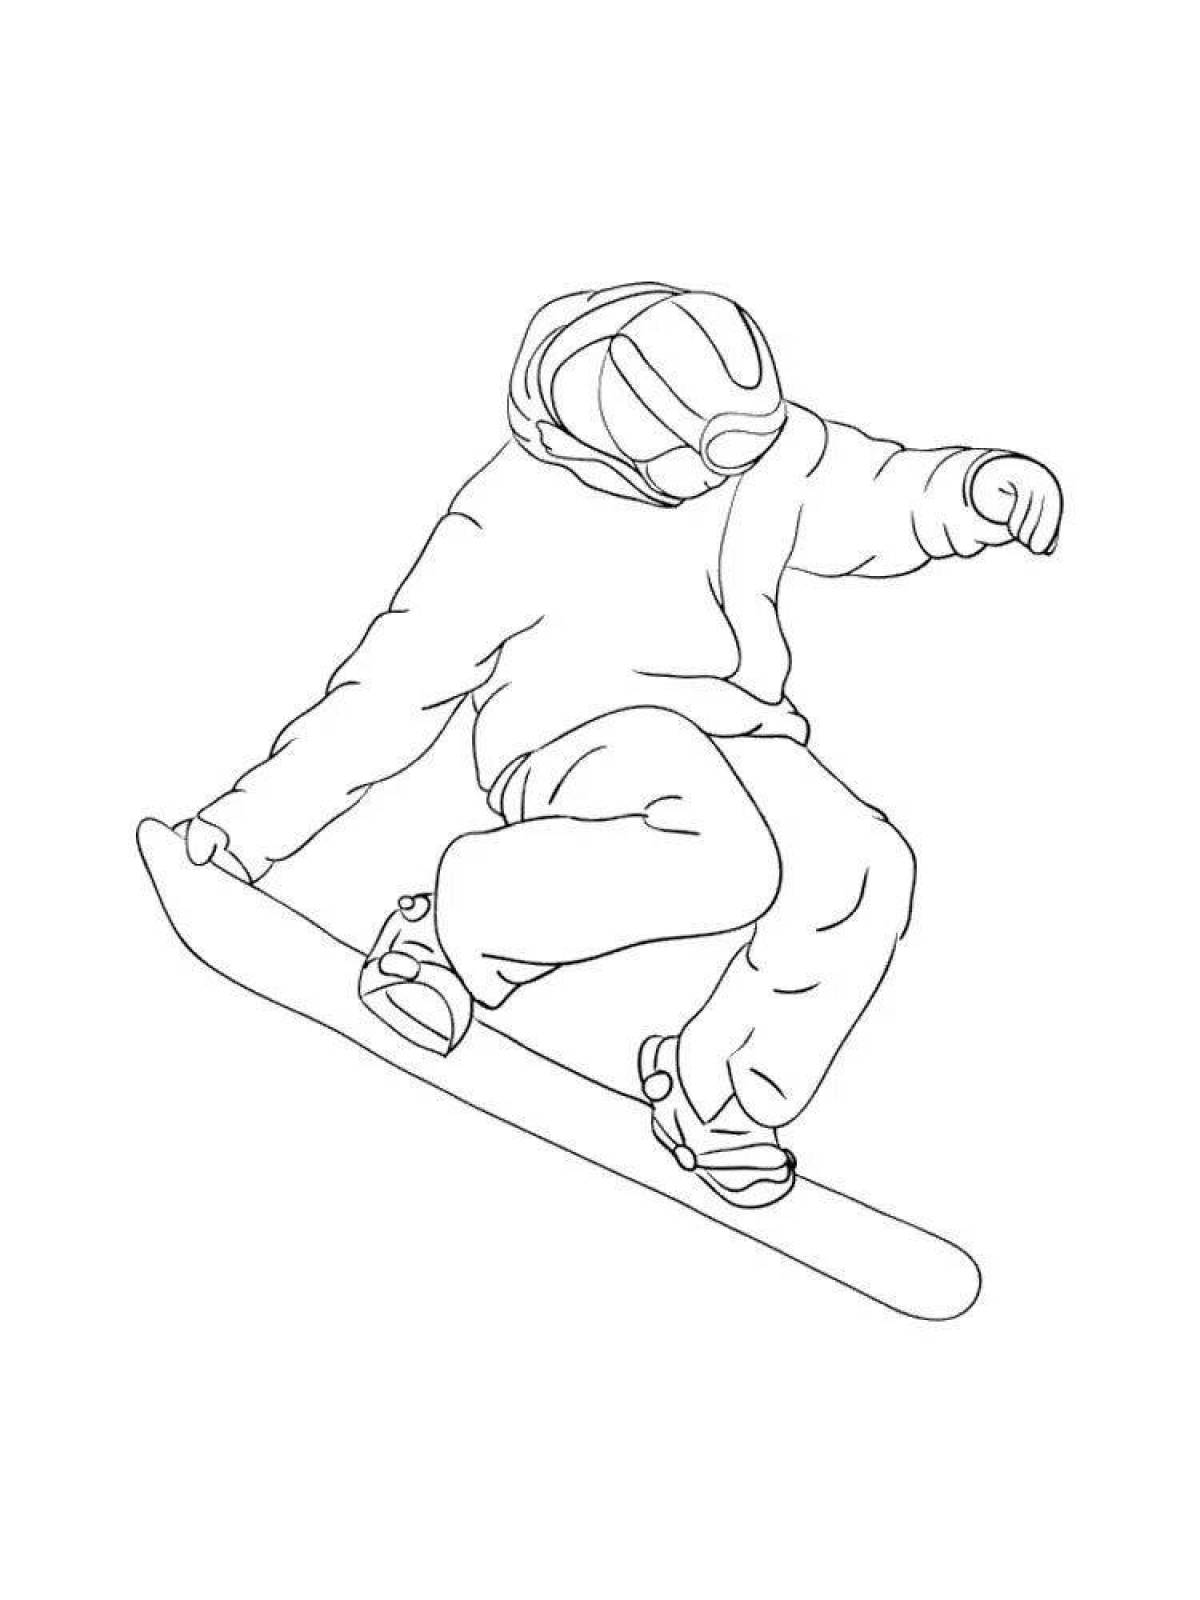 Glamorous snowboard coloring page